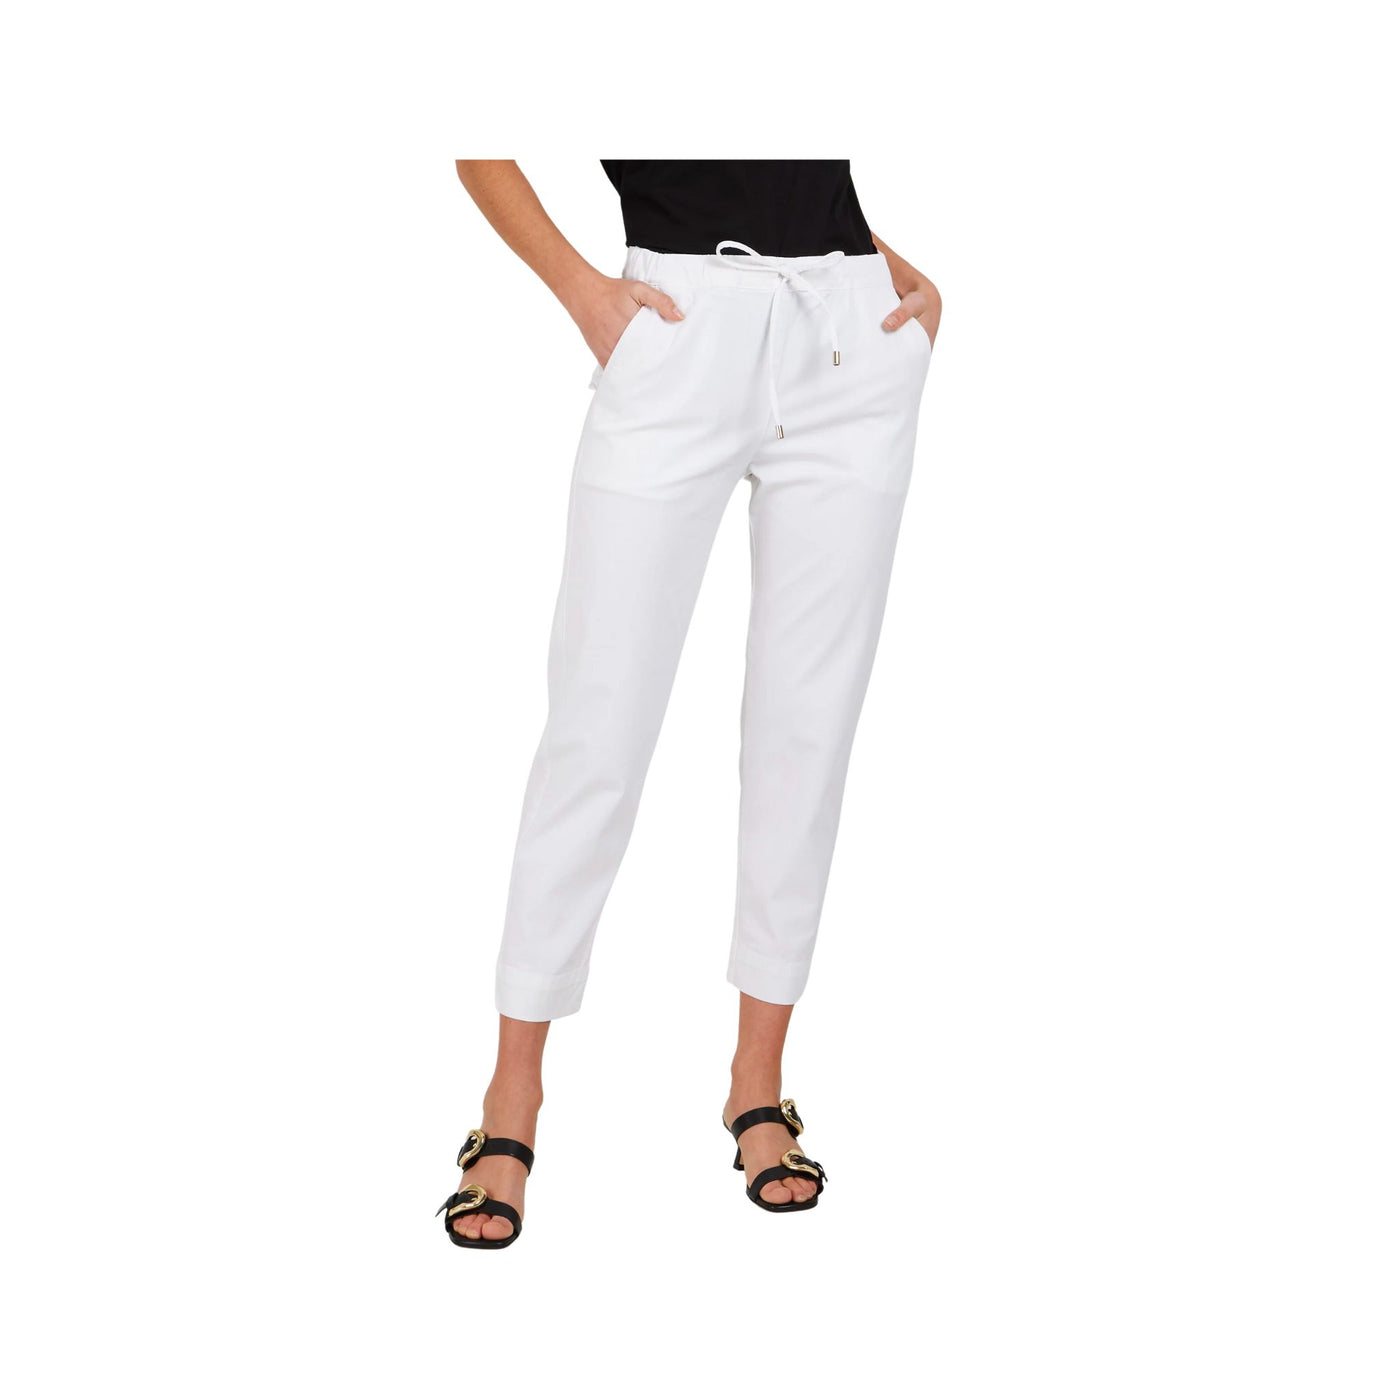 Women's elastic trousers in solid color